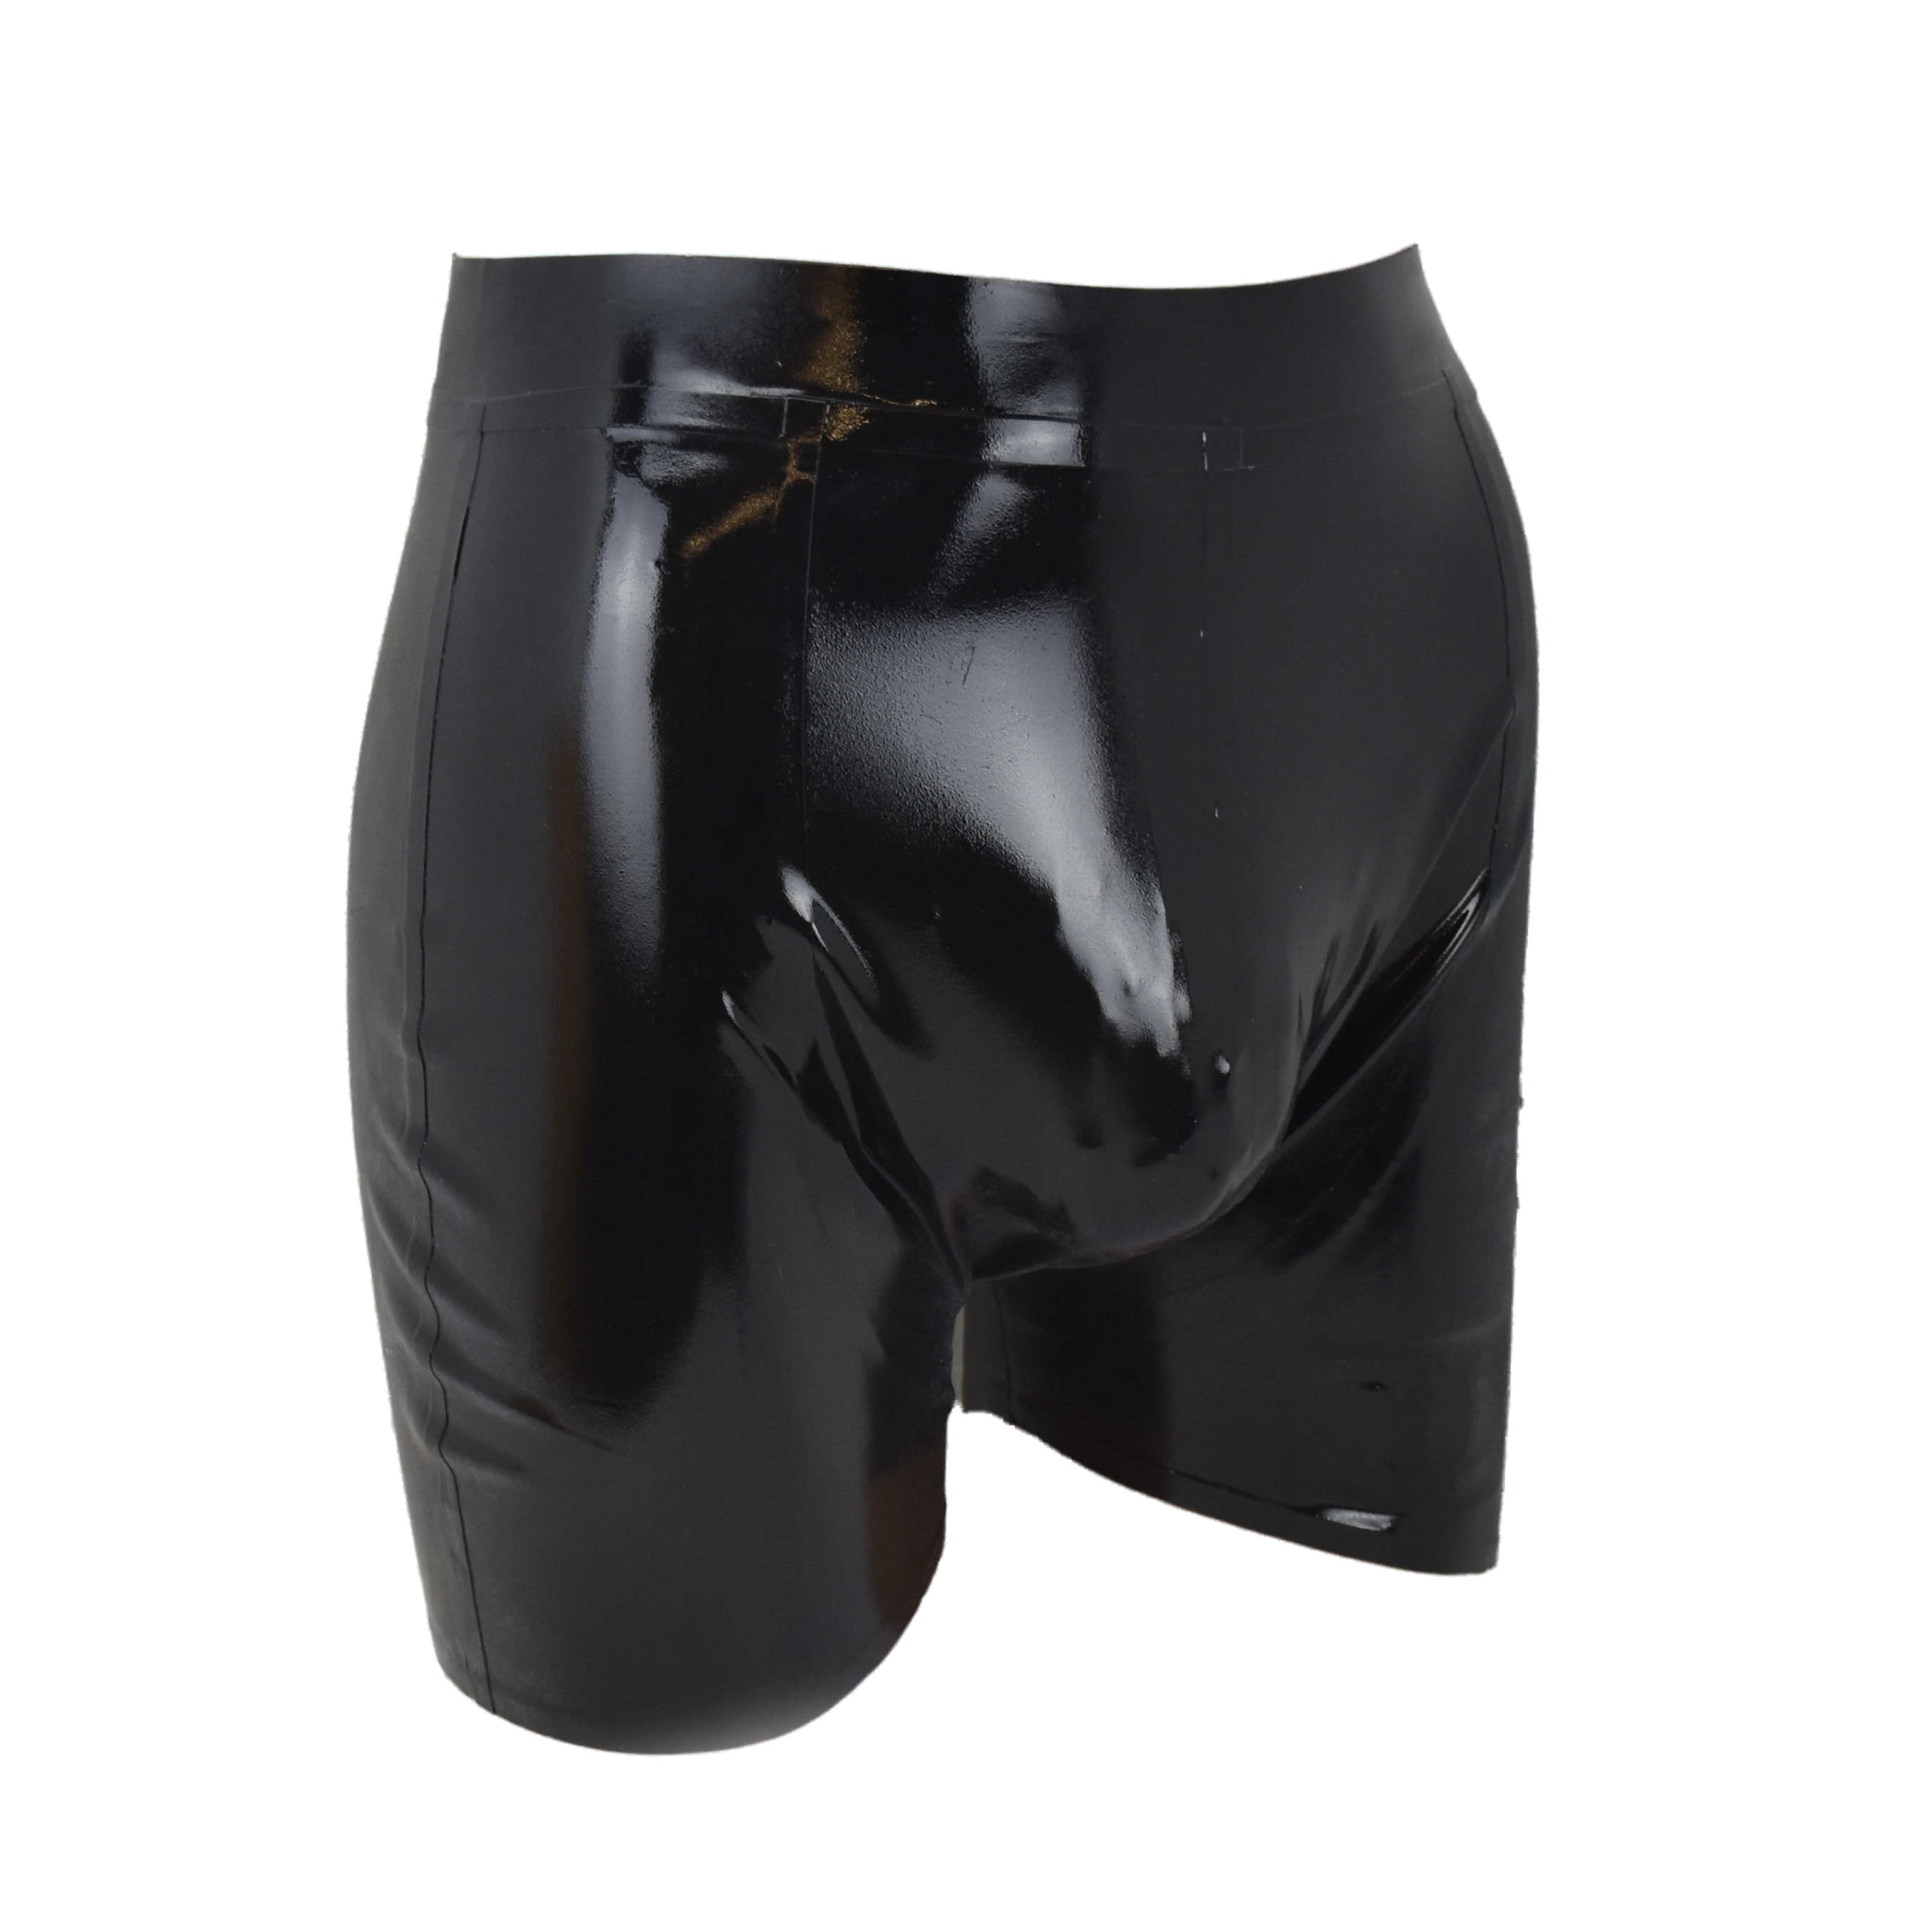 C K Very Shiny PVC Leggings Trousers Pants Very Glossy and